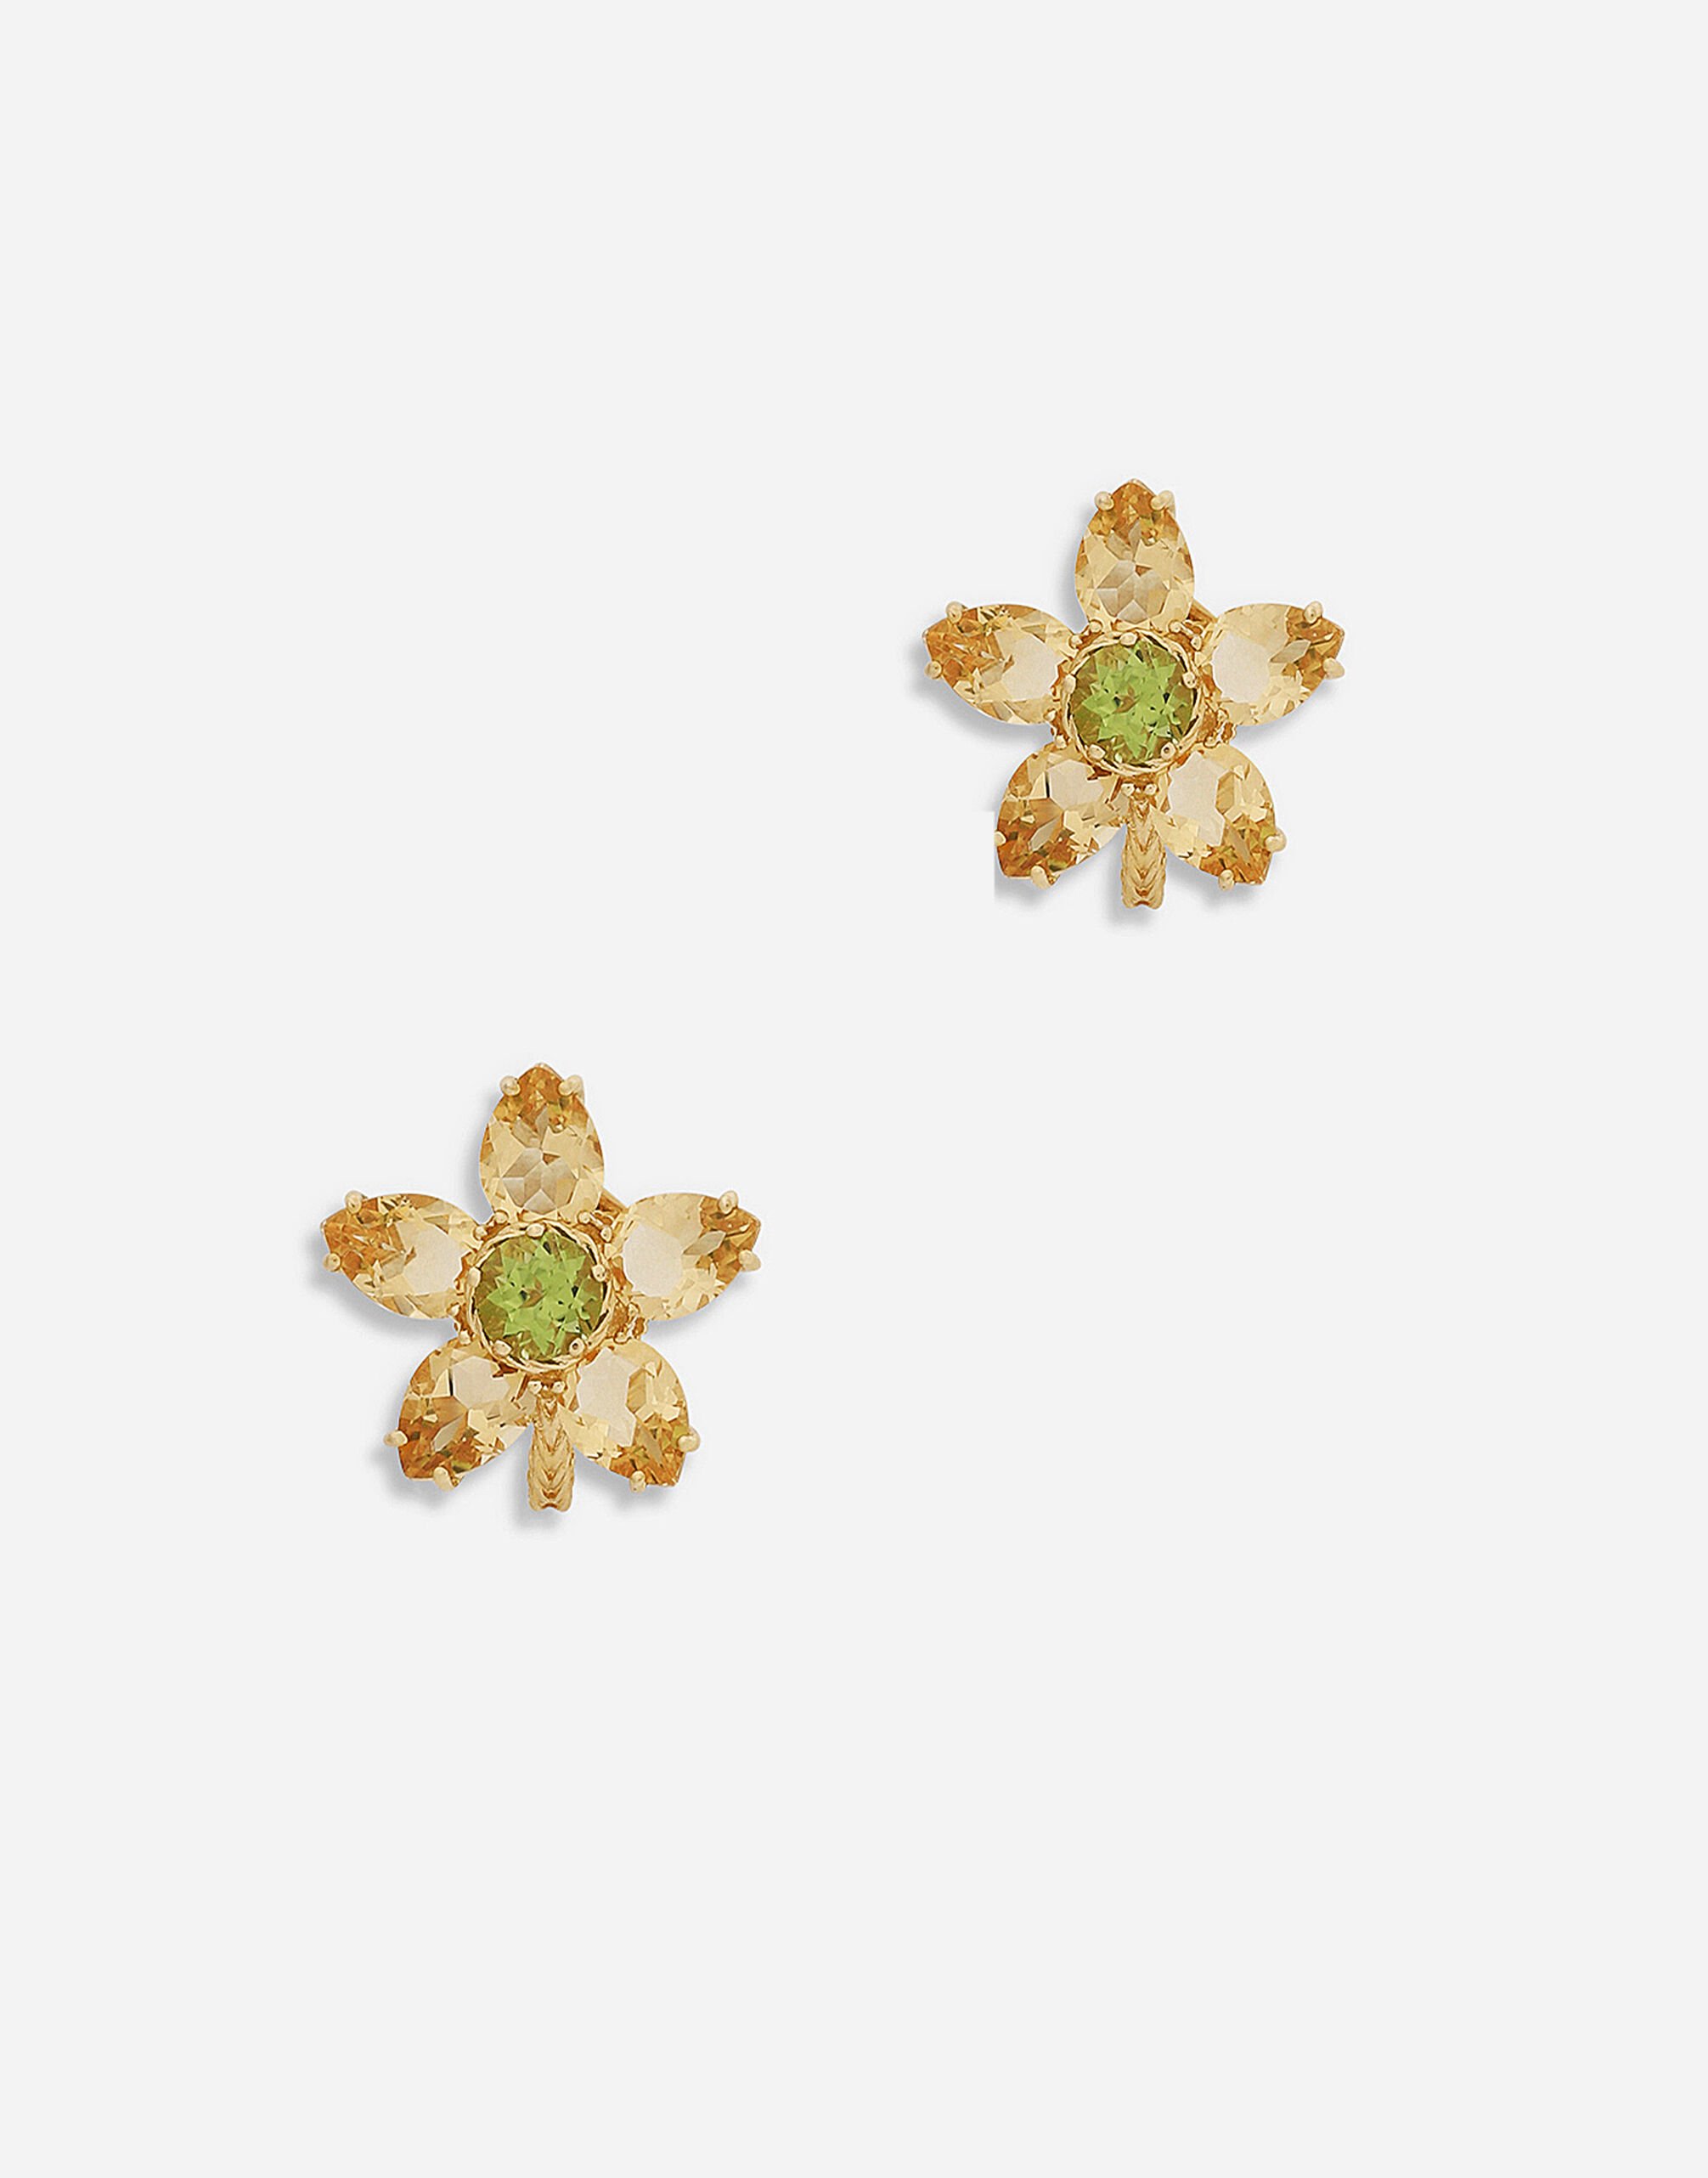 Dolce & Gabbana Spring earrings in yellow 18kt gold with citrine flower motif Yellow Gold WAQR2GWMIX1